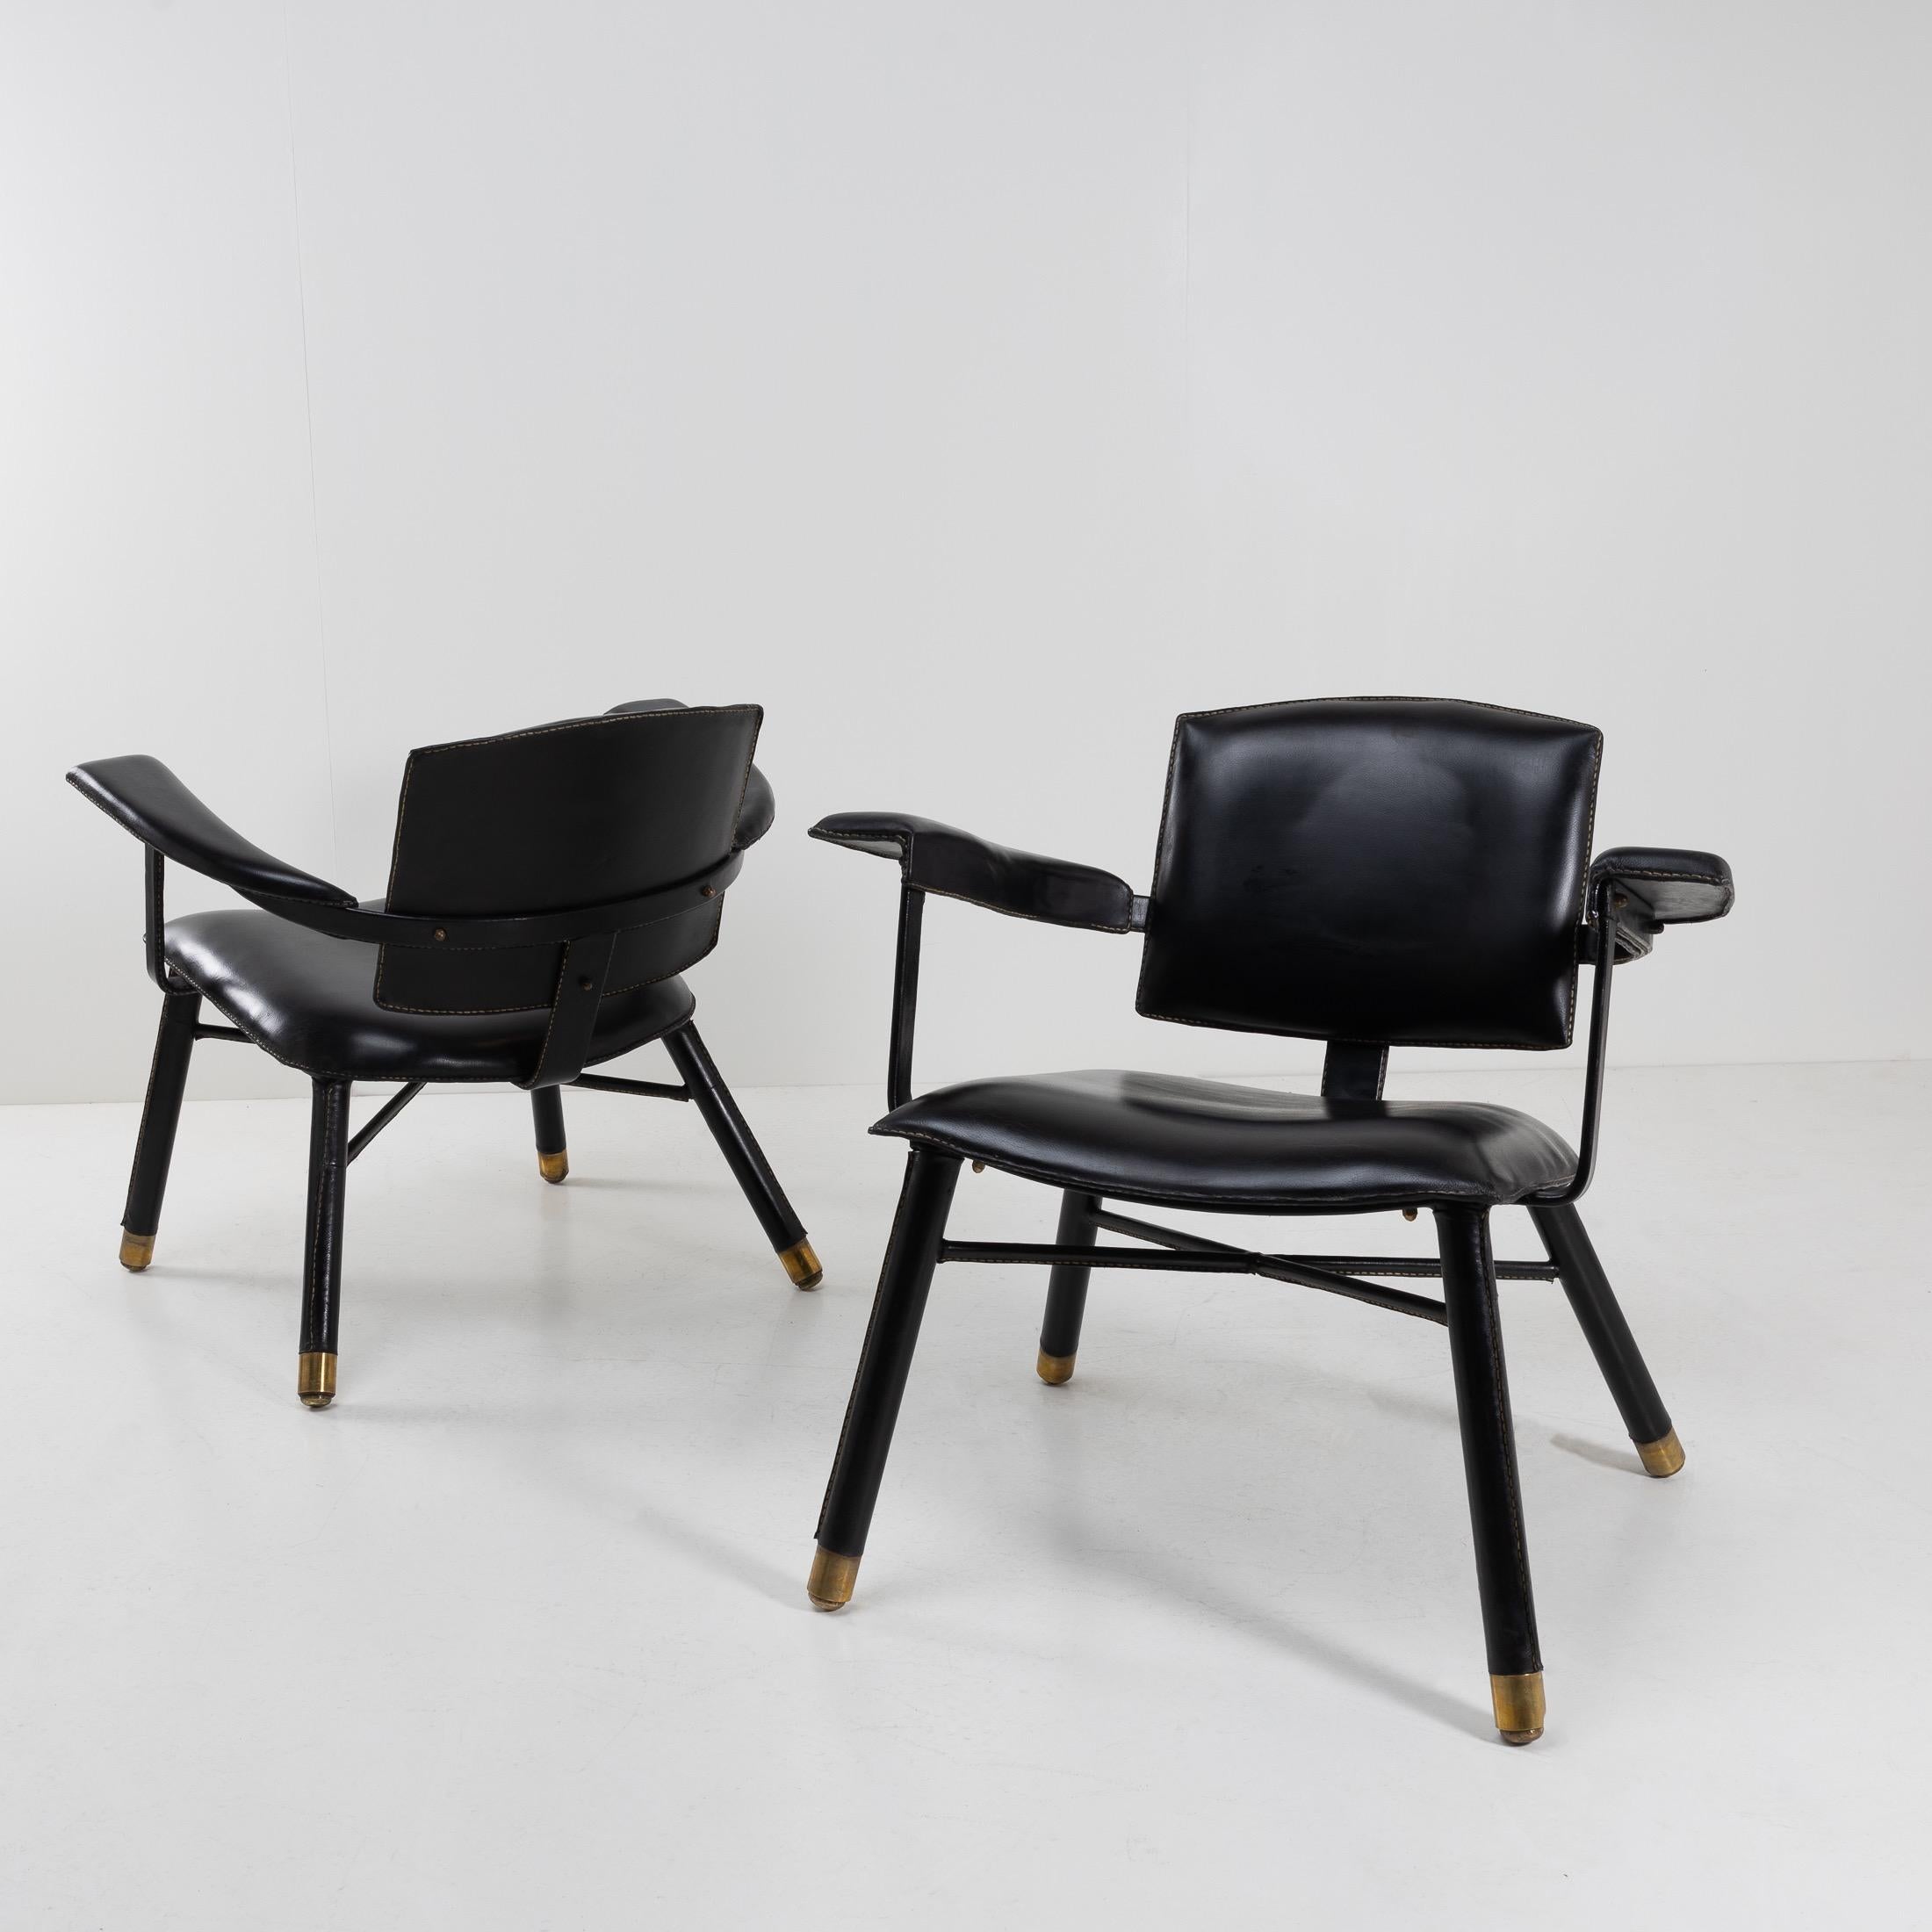 20th Century Pair of Black Leather Armchairs Called “Chauffeuse” by Jacques Adnet